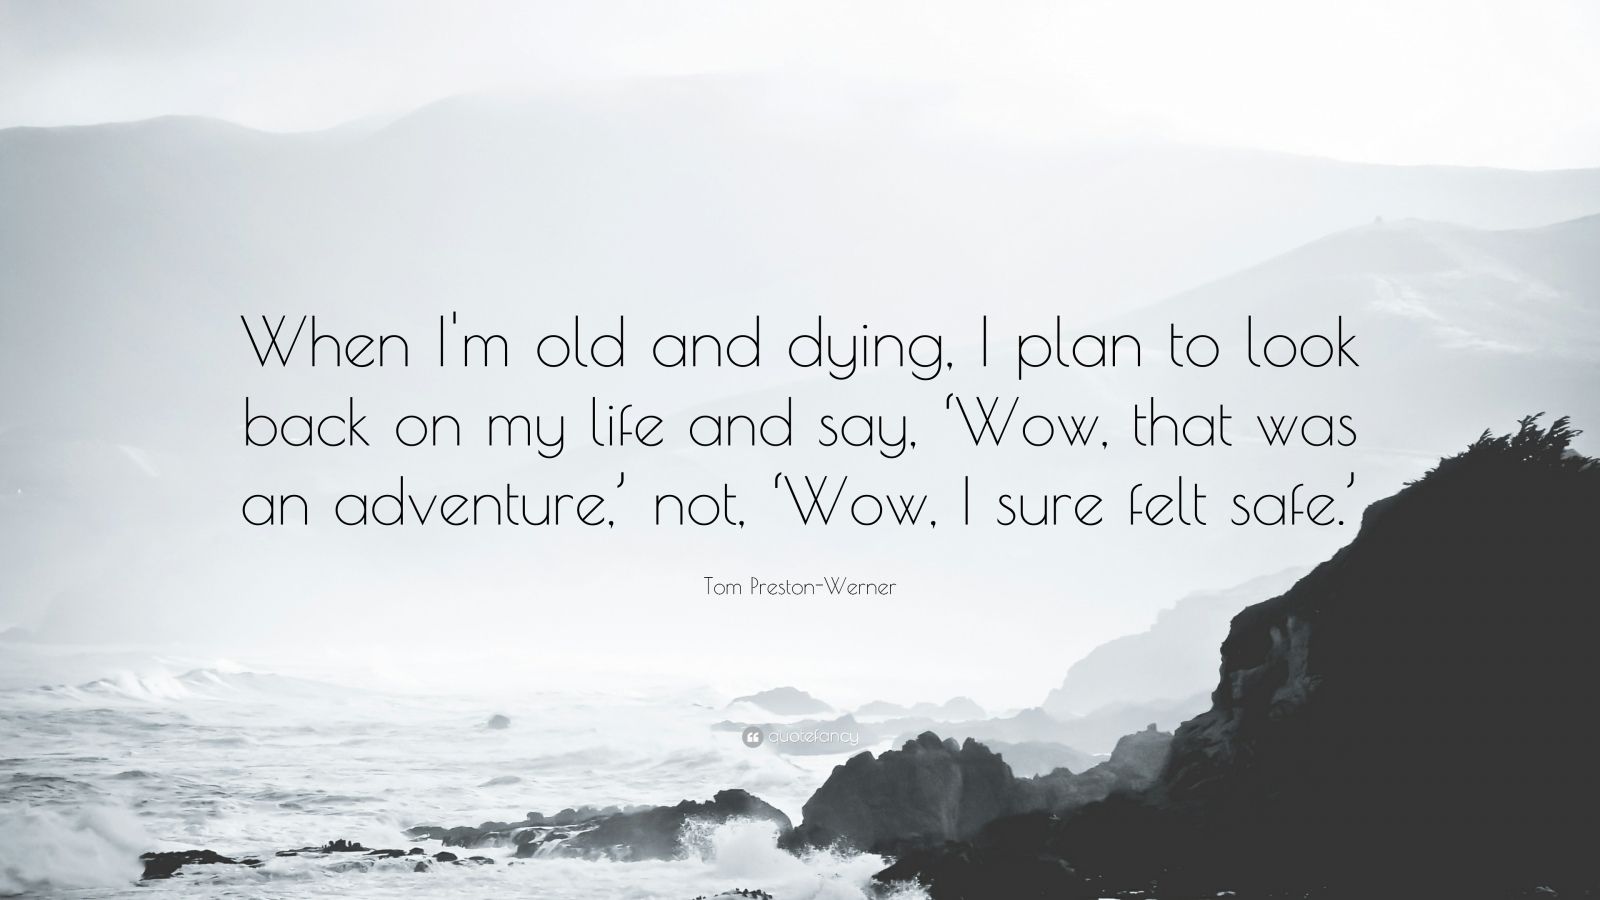 Inspirational Entrepreneurship Quotes “When I m old and dying I plan to